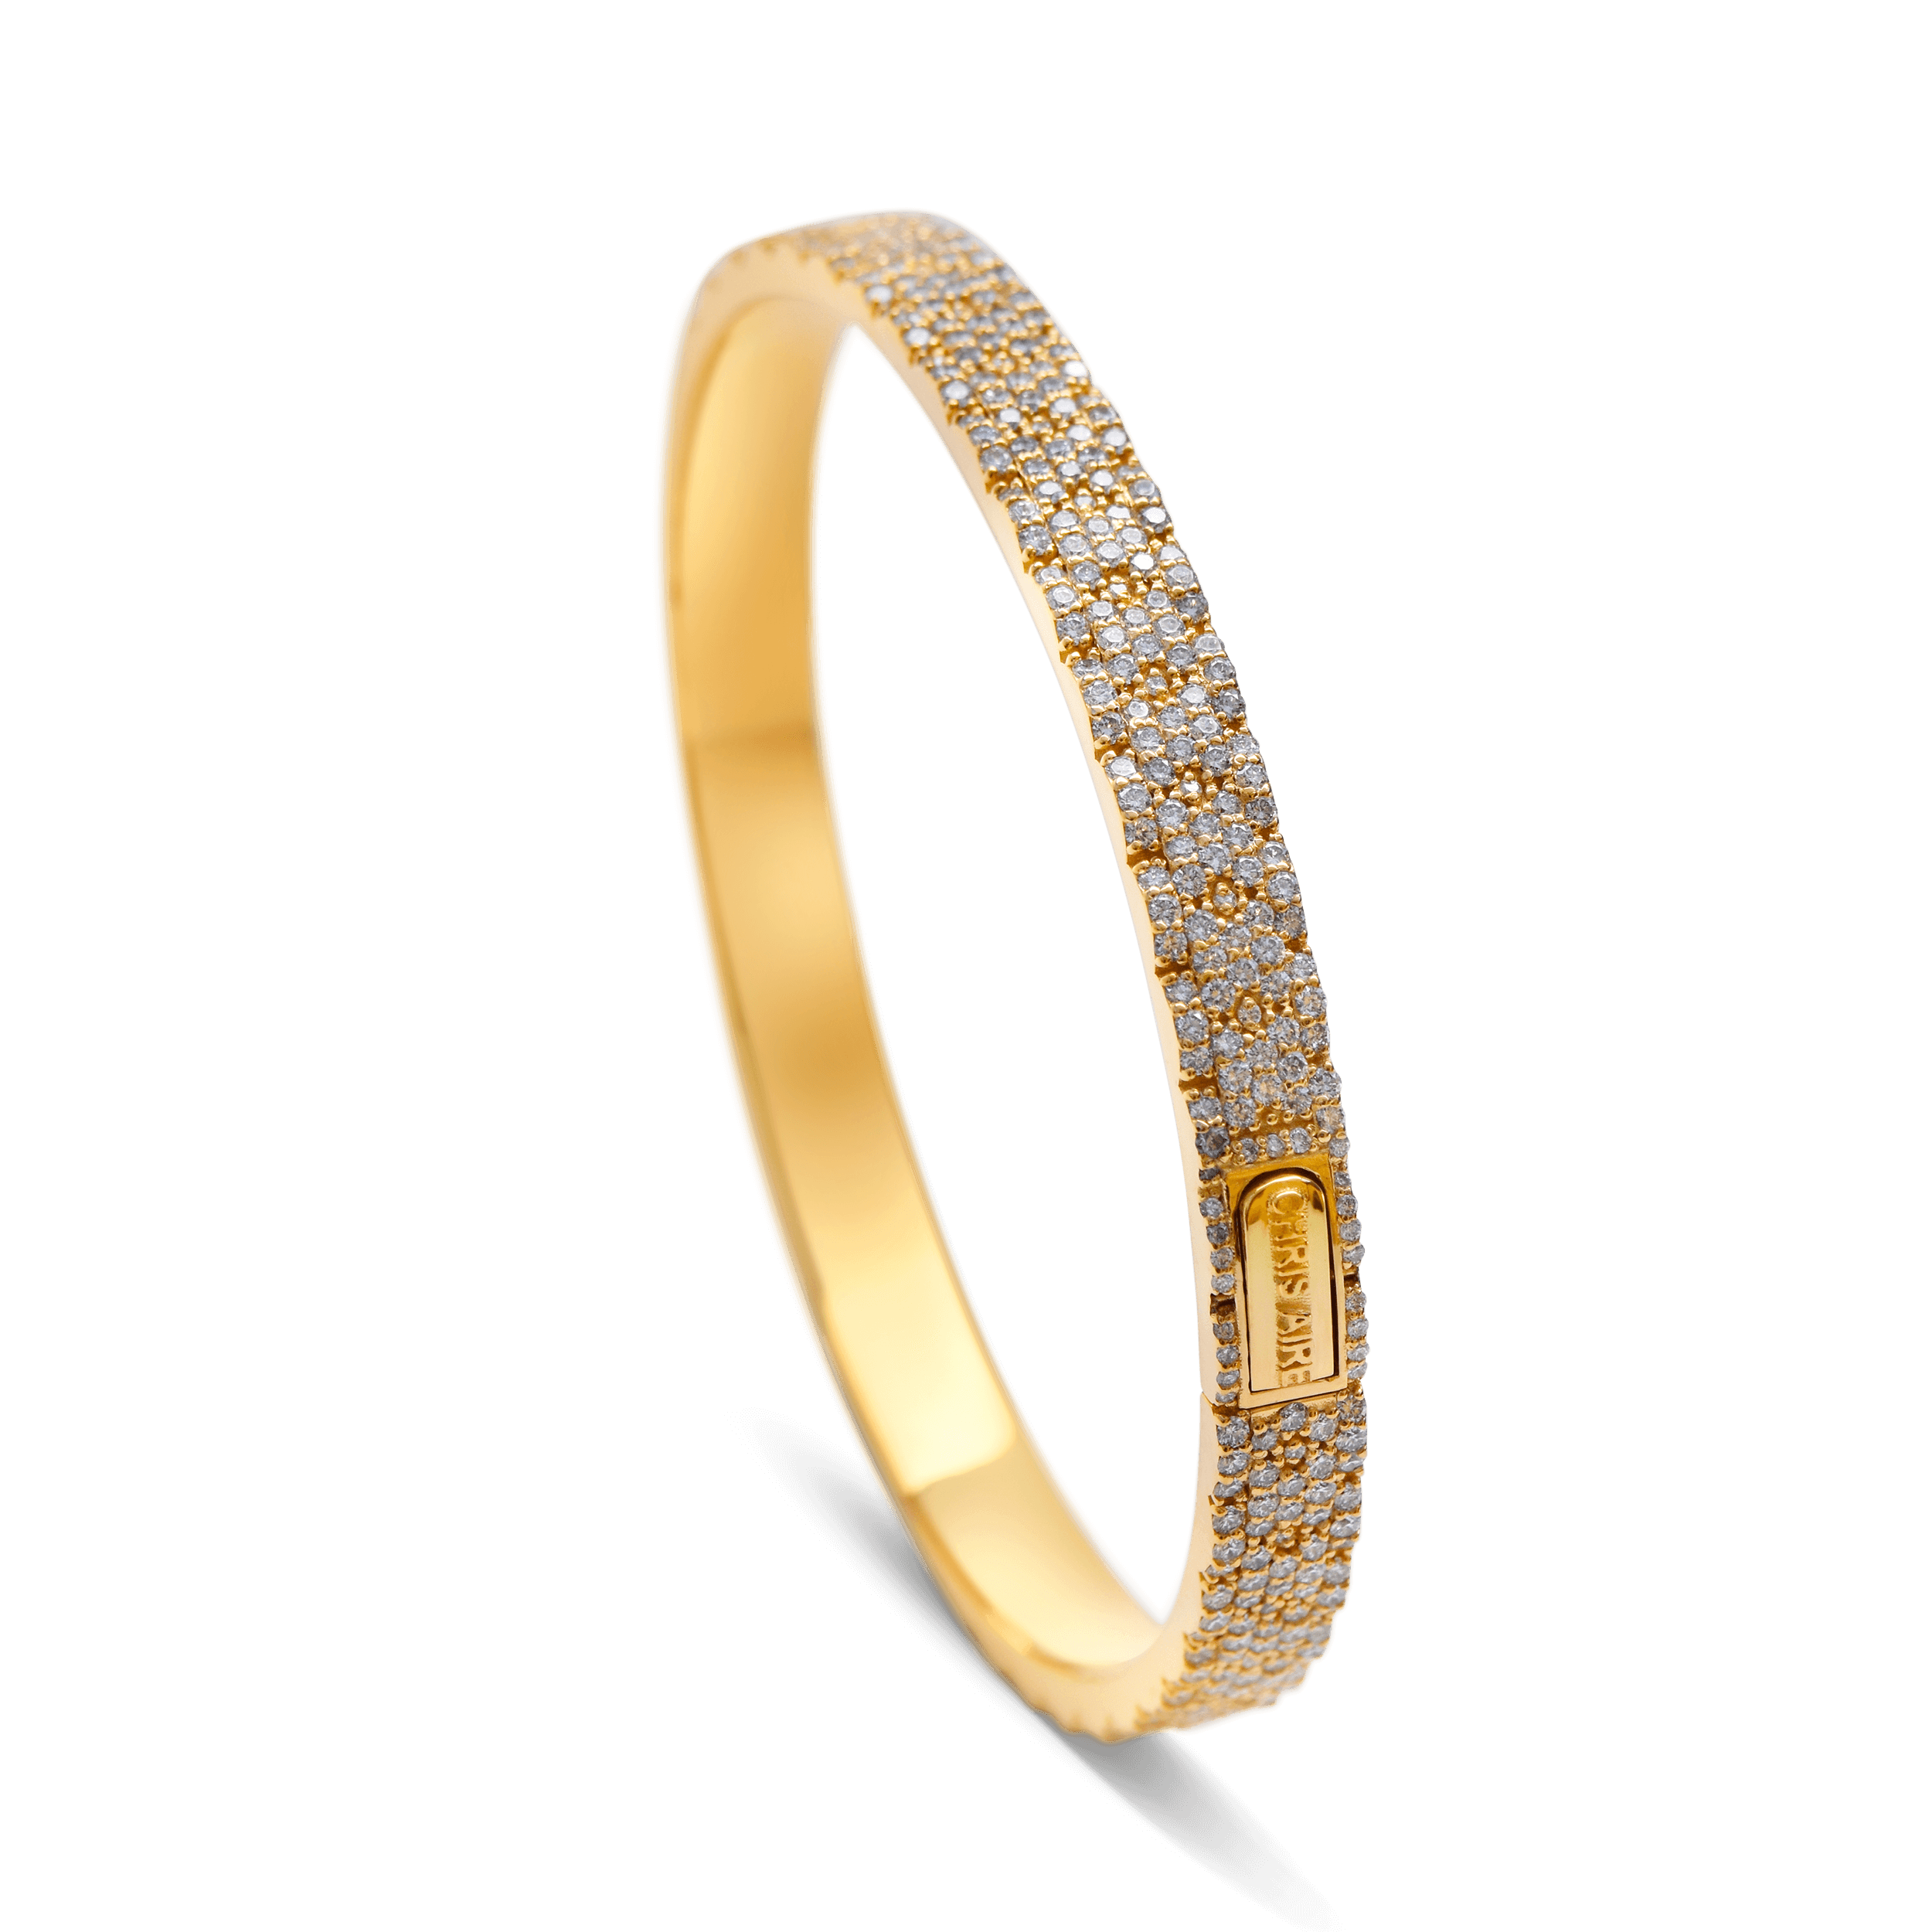 Mobility Bangle-18 Karat Solid Yellow Gold With Diamonds For Men and Women